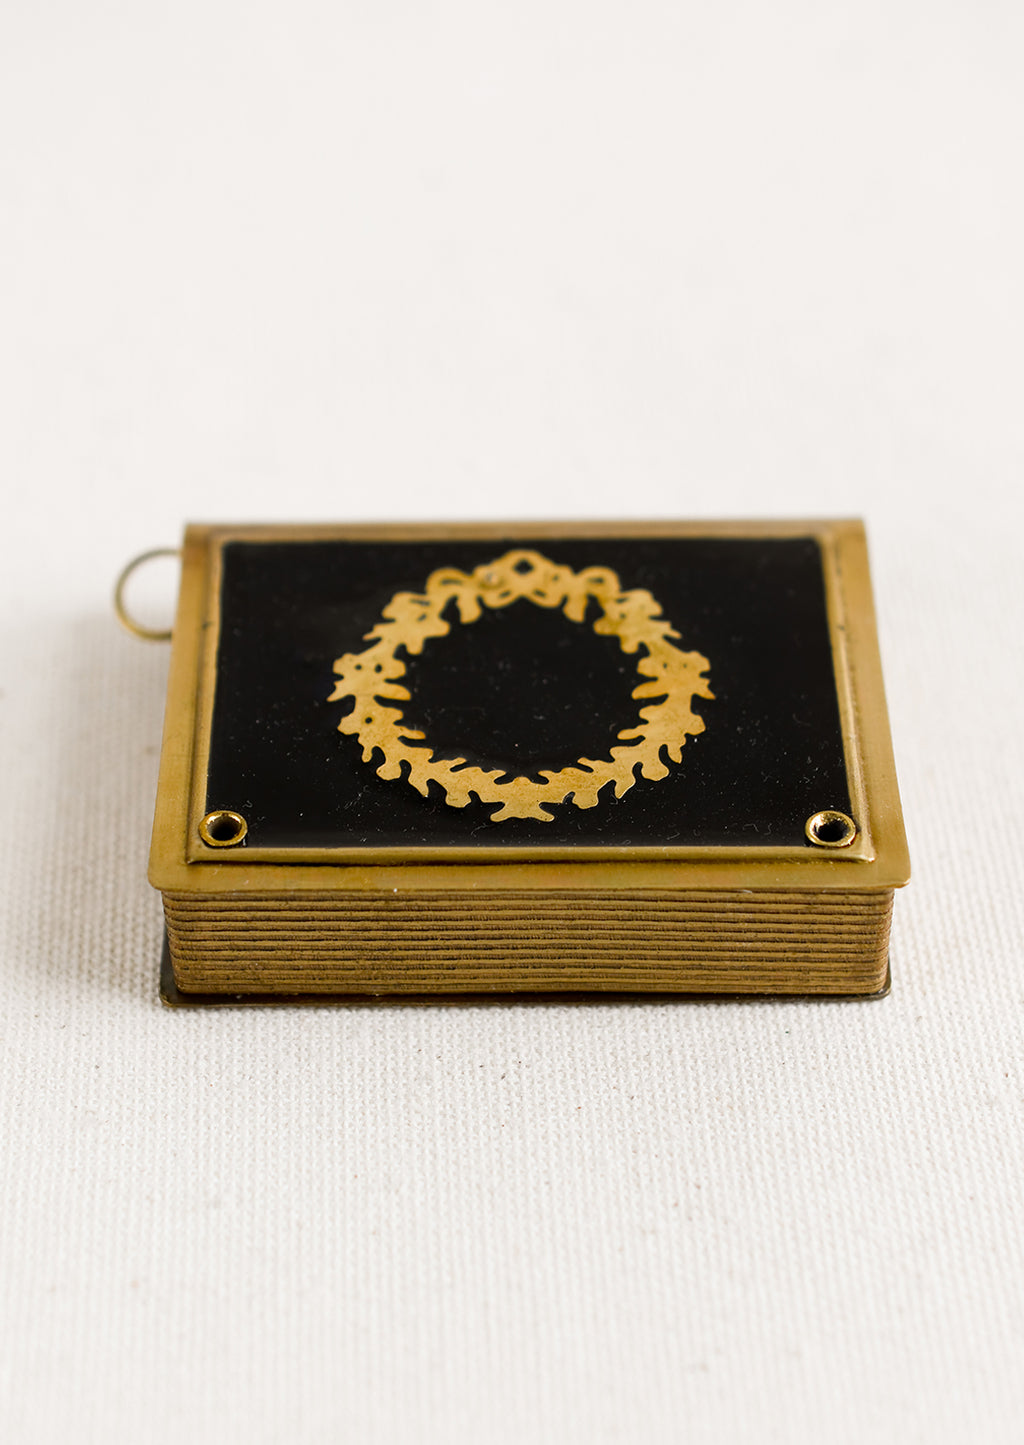 5: A book-shaped measuring tape with brass wreath design on black enamel.